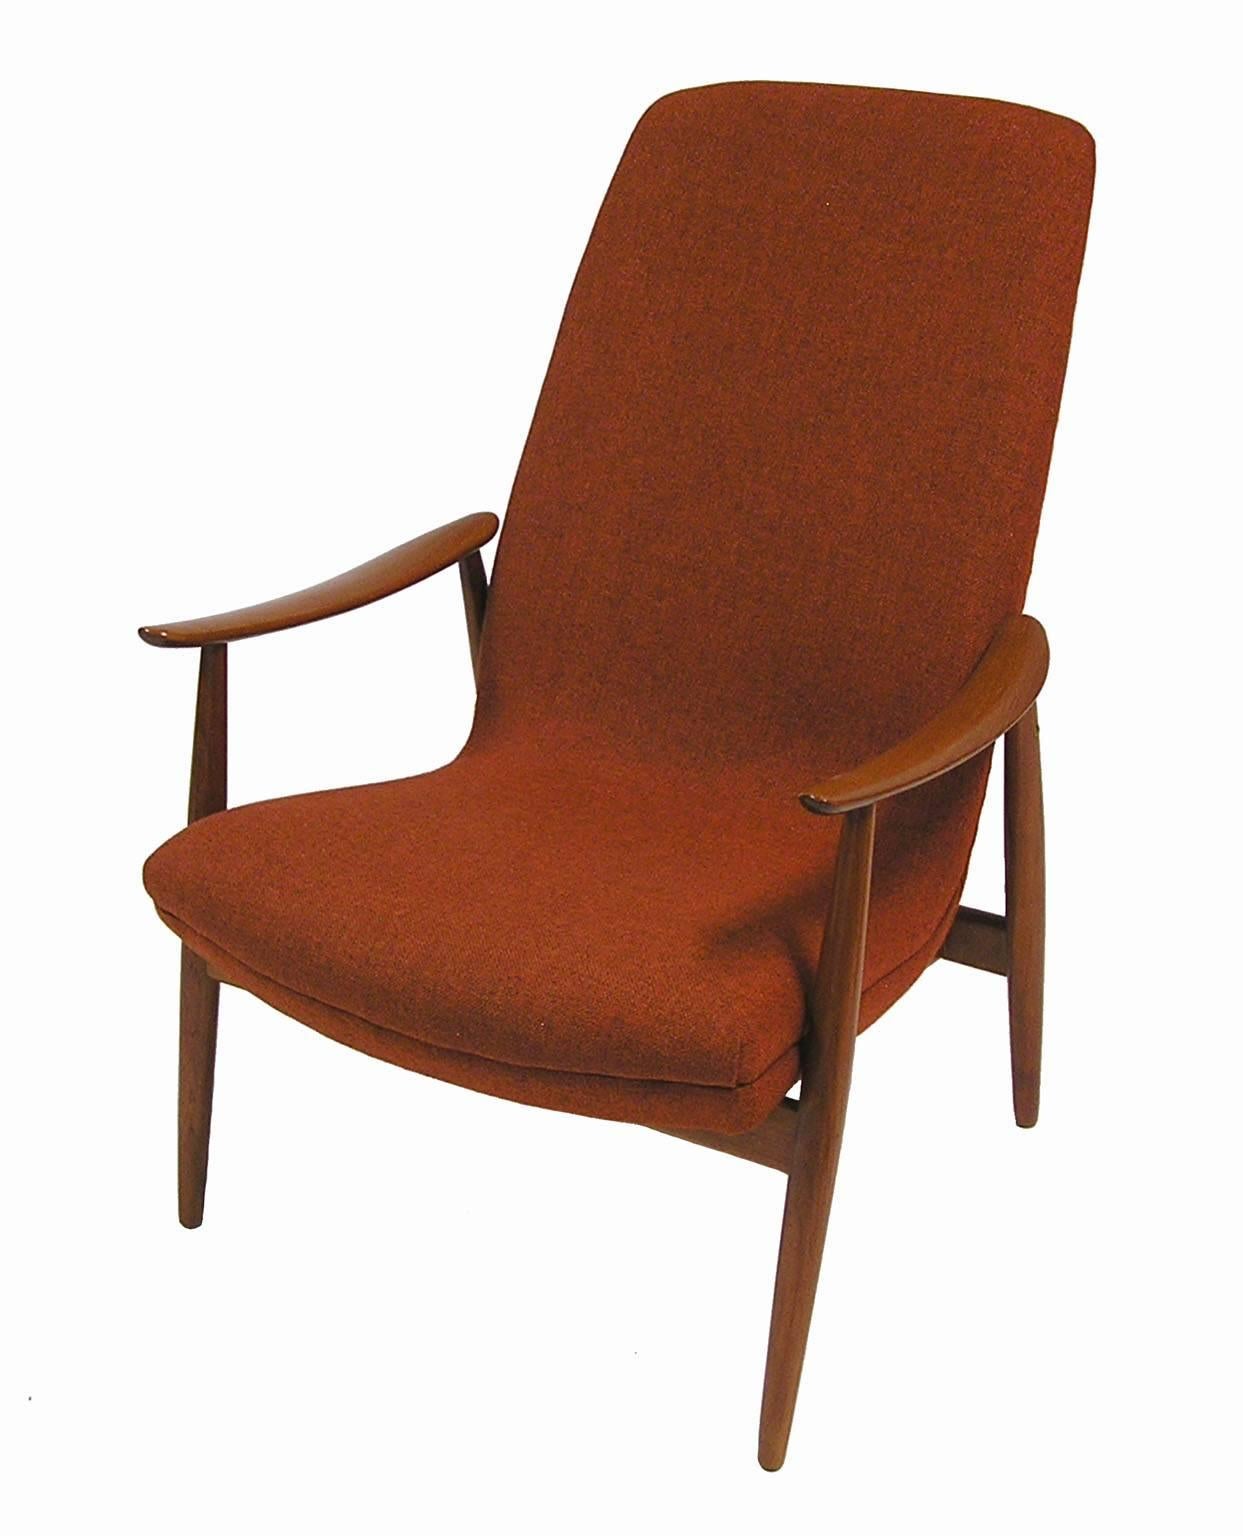 A stylish teak lounge chair designed by Ingmar Relling for Westnofa of Norway. Gorgeous Scandinavian Modern era lines with beautifully crafted armrests and removable head cushion. Newly re-foamed but retaining the original rust colored fabric and in